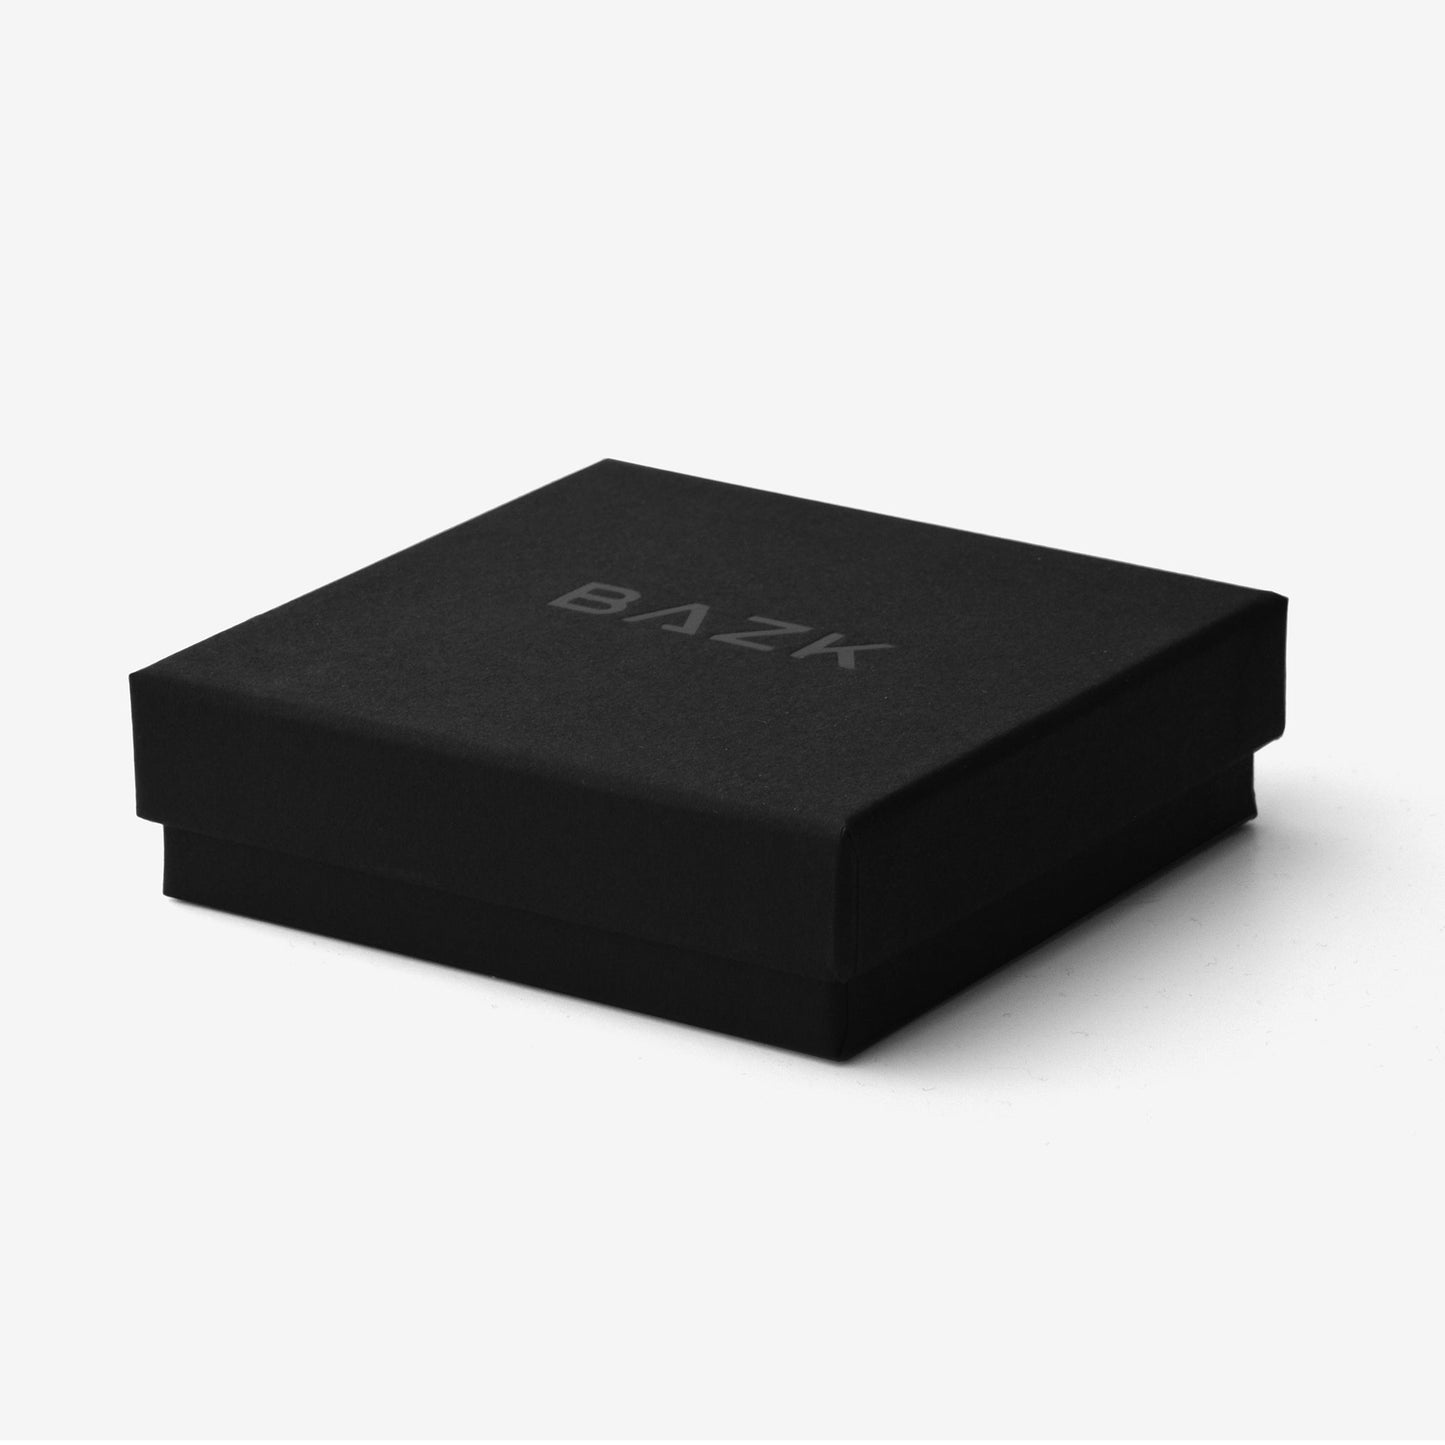 Black Jewelry Box with the BAZK logo in which the silver bracelet will be packed before shipping.